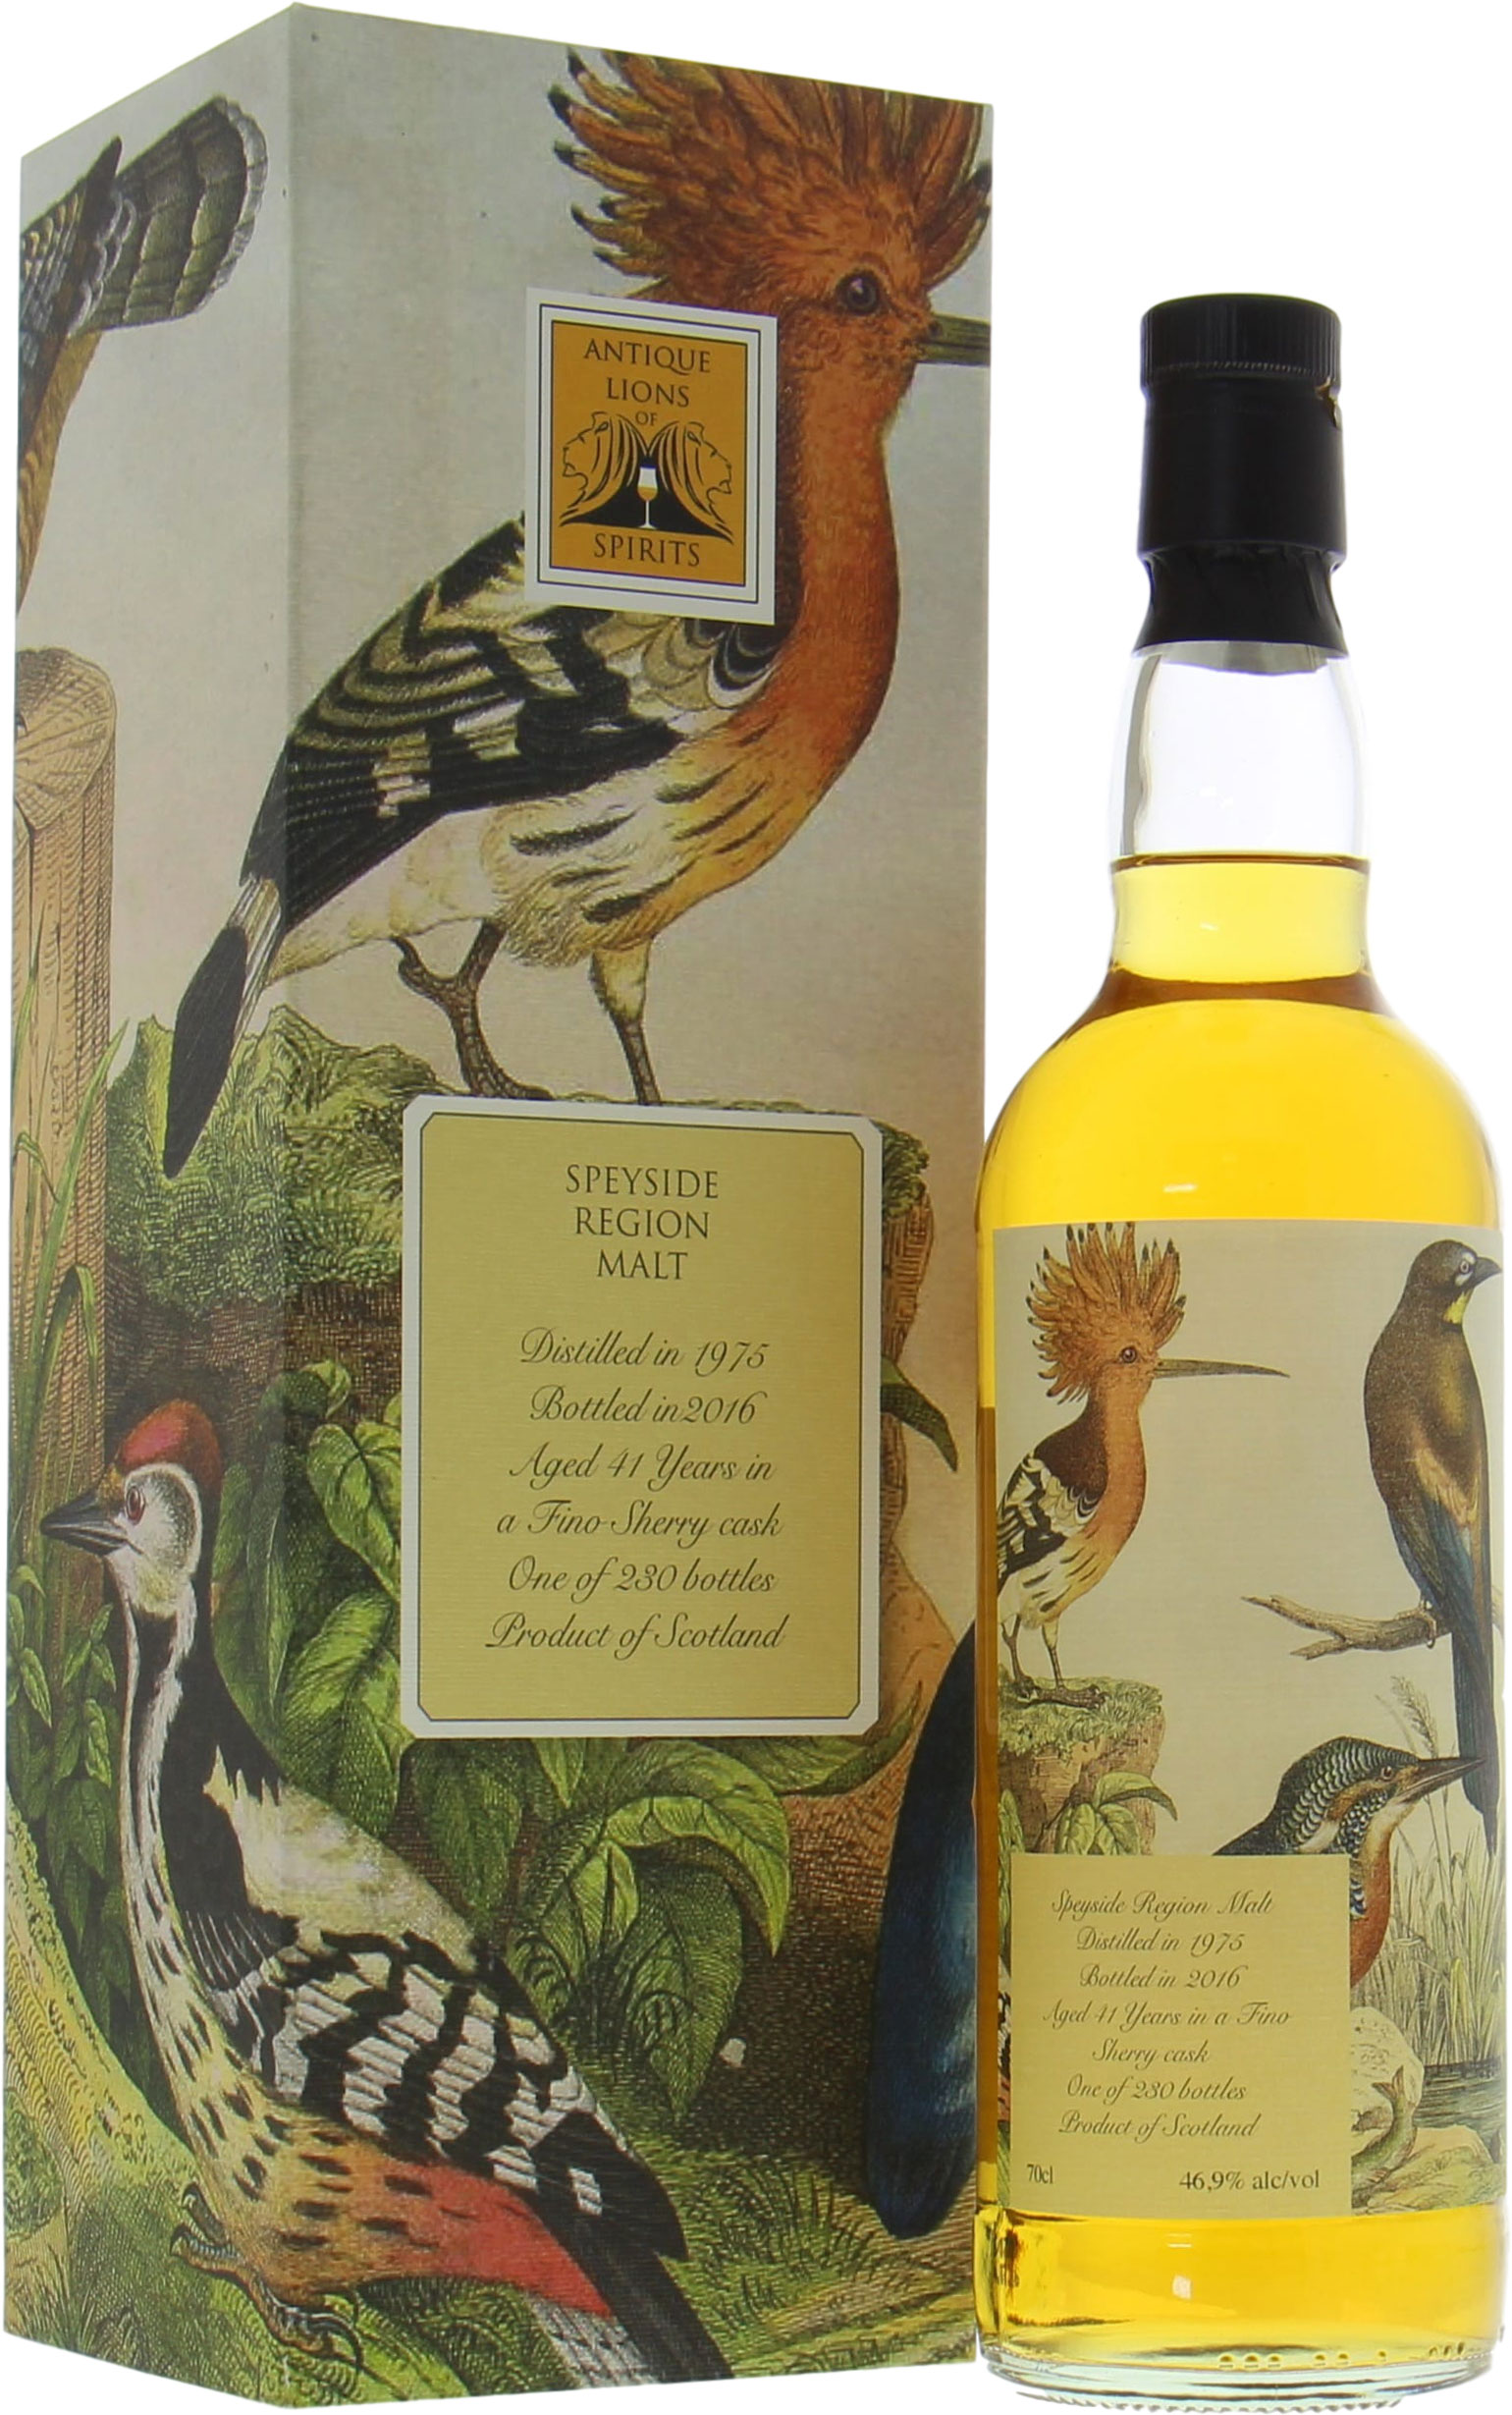 Speyside Region - 41 Years Old Antique Lions of Spirits The Birds 46.9% 1975